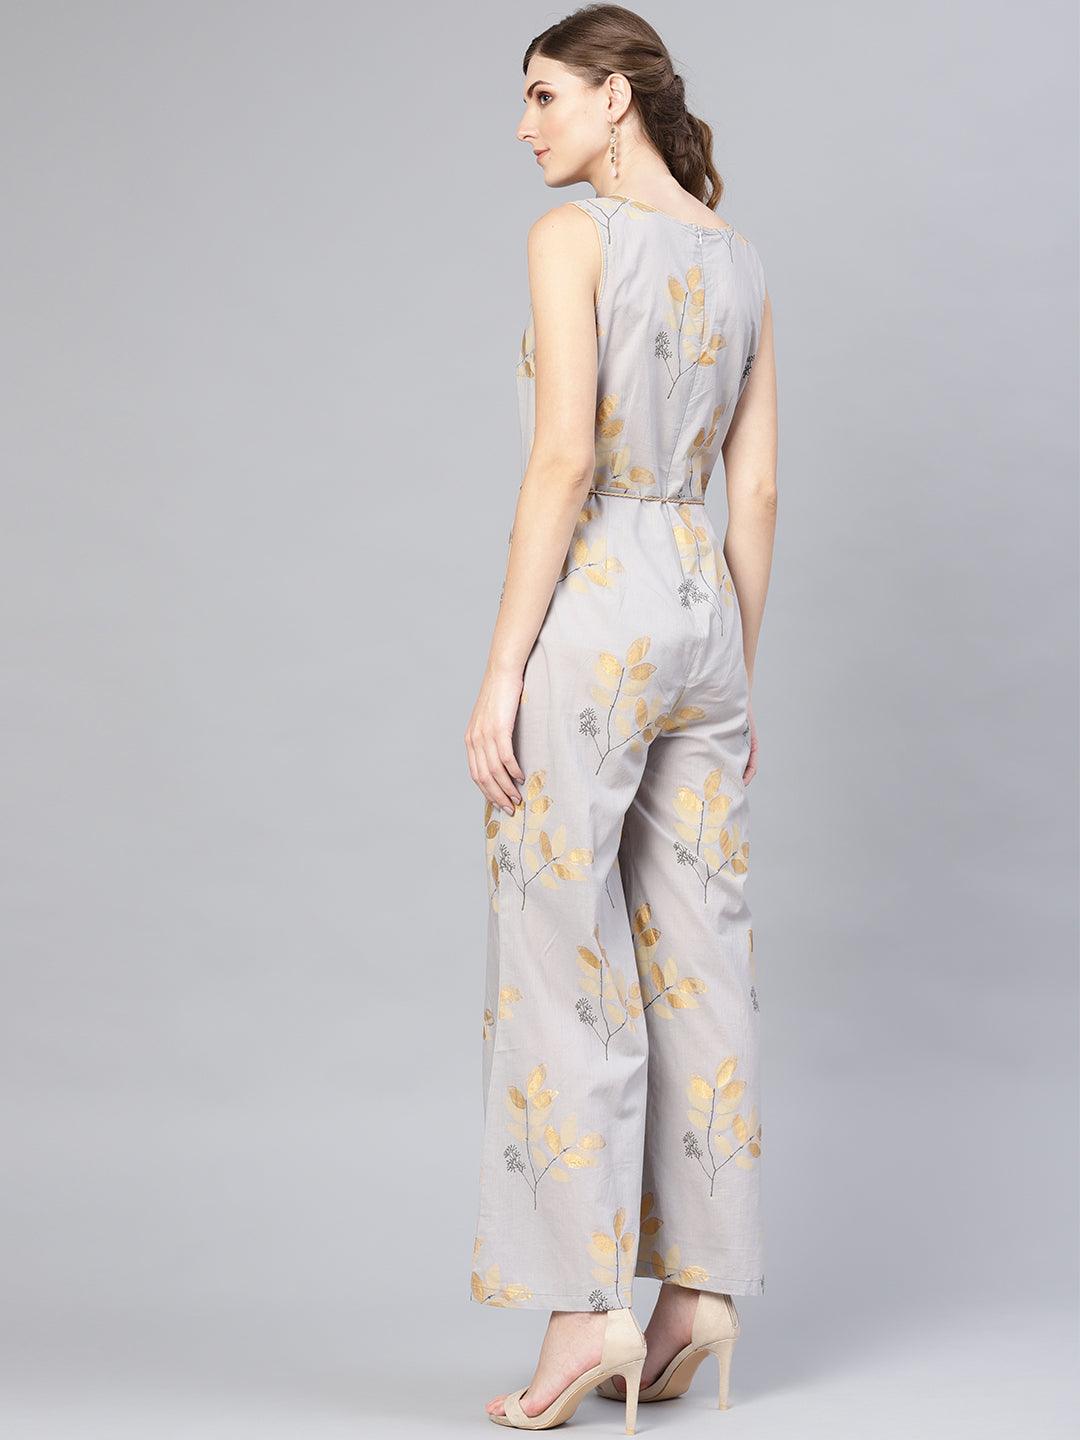 Grey Gold Printed Jumpsuit (Fully Stitched) - Znxclothing